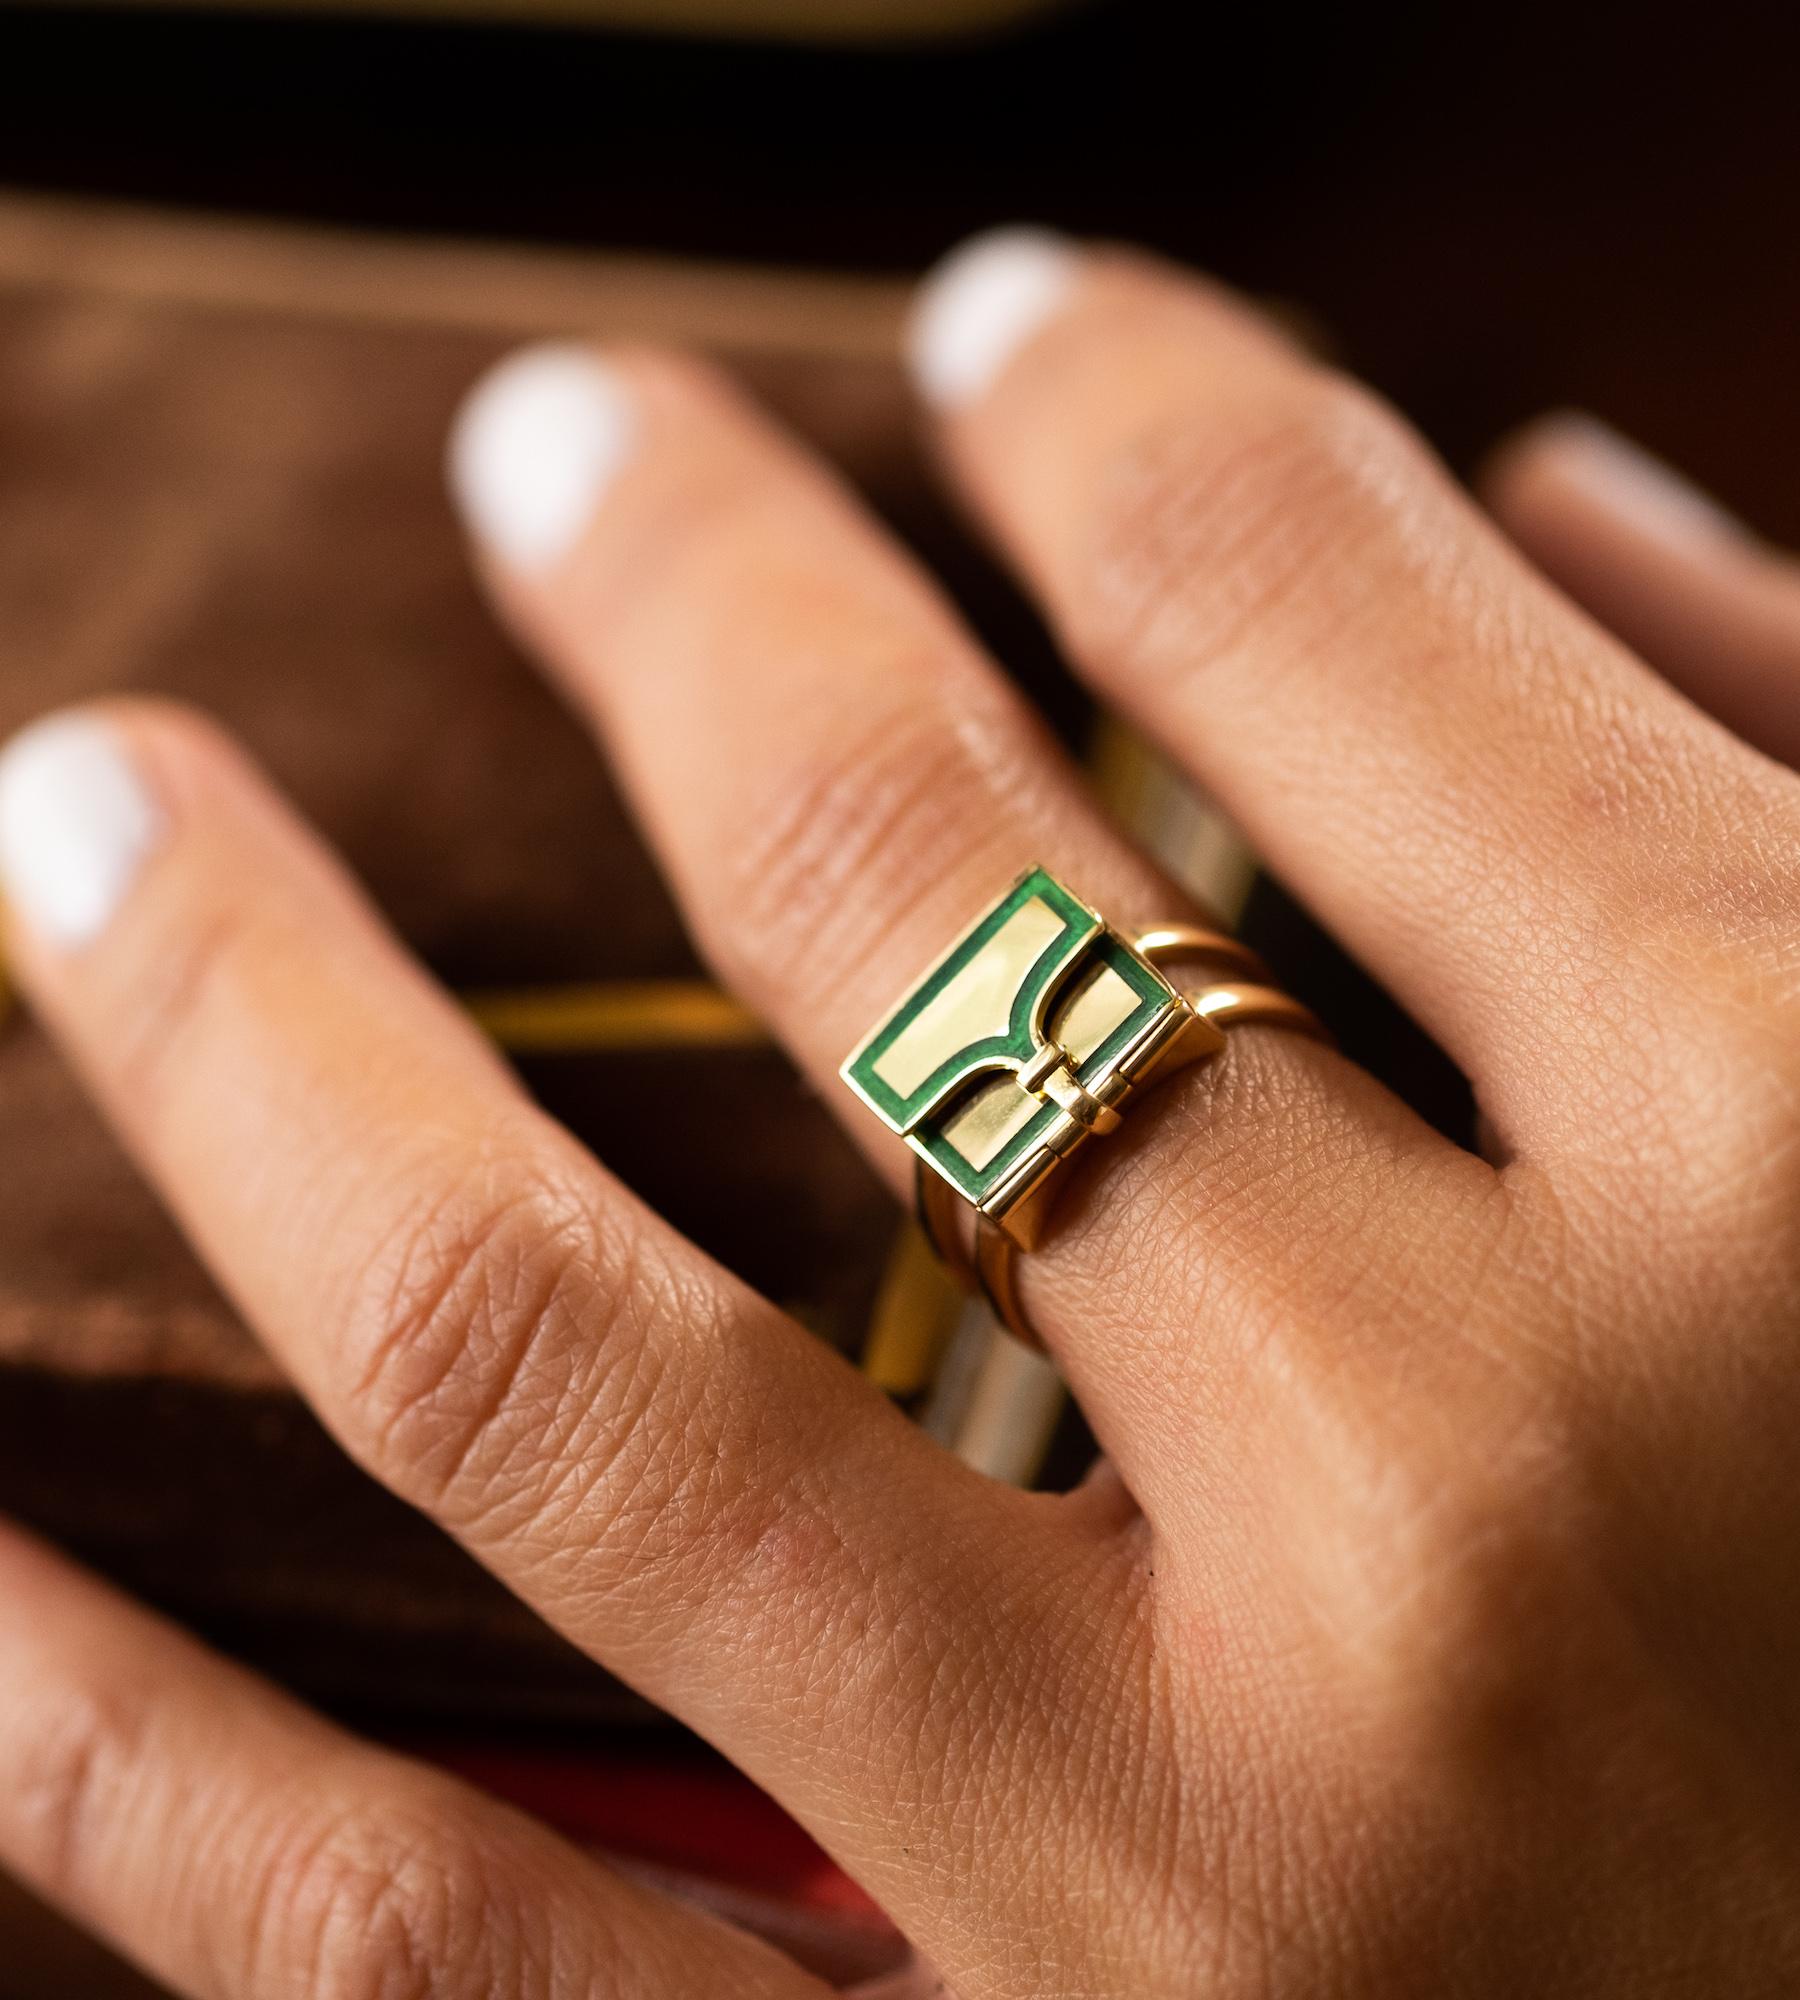 The Fleur Fairfax Book Ring in 18ct Gold and Enamel - Serpentine Green US 5.75 For Sale 1